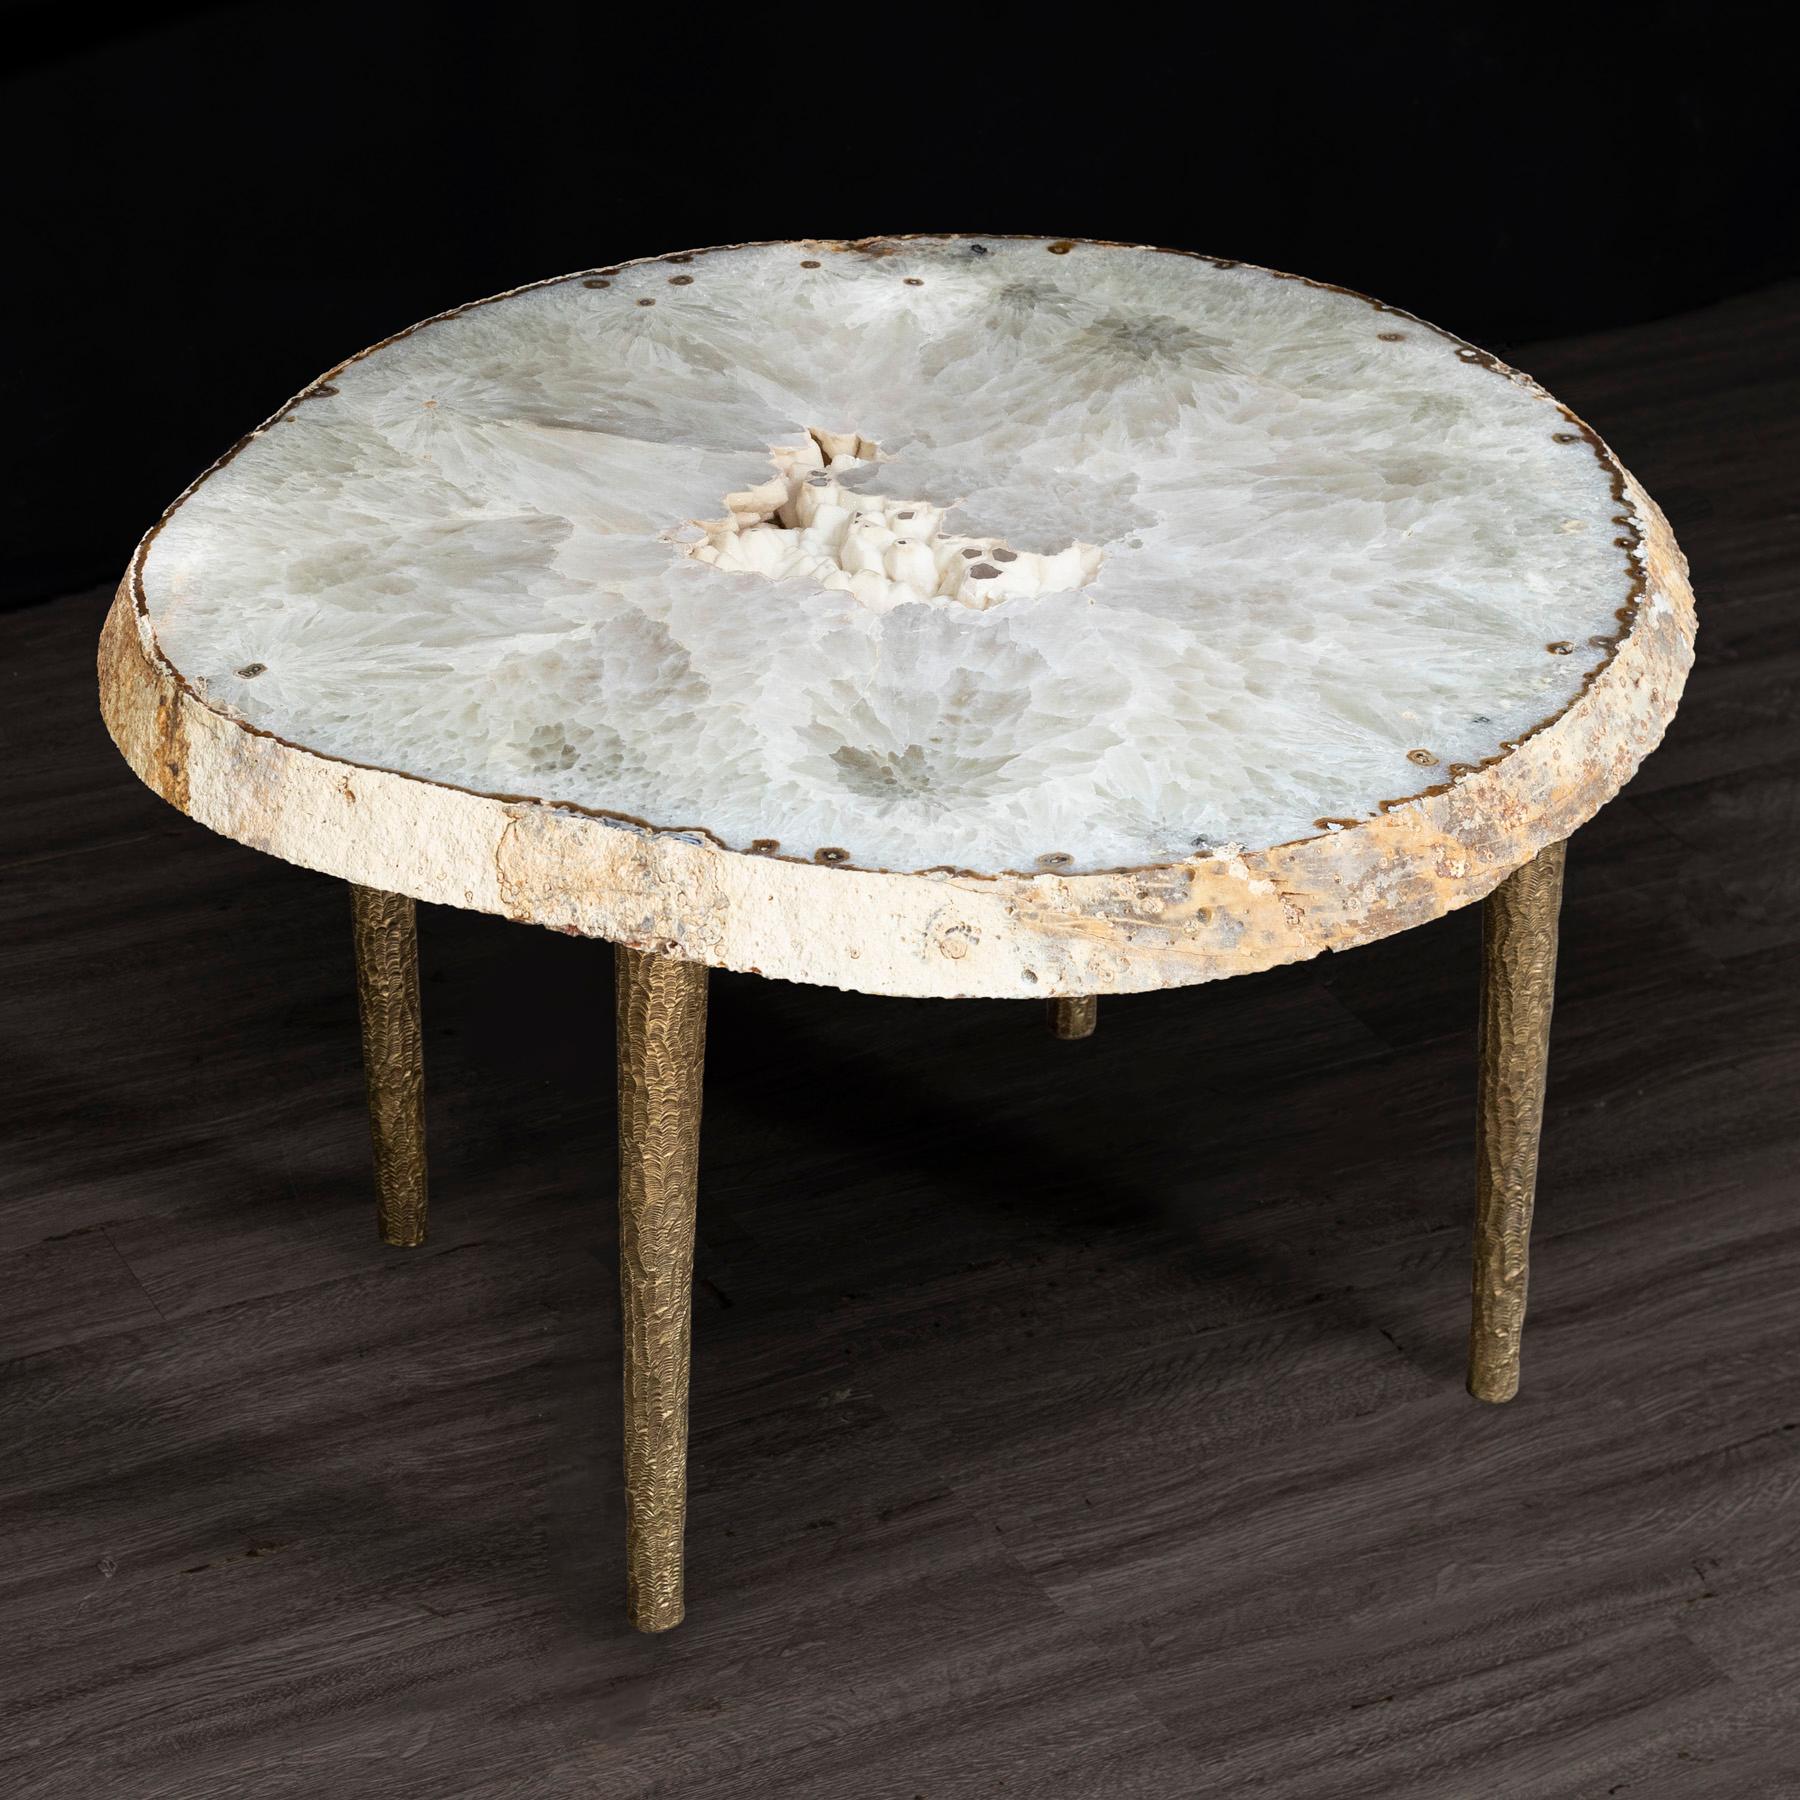 Organic Modern Side or Coffee Table, White Brazilian Agate with Solid Bronze Base